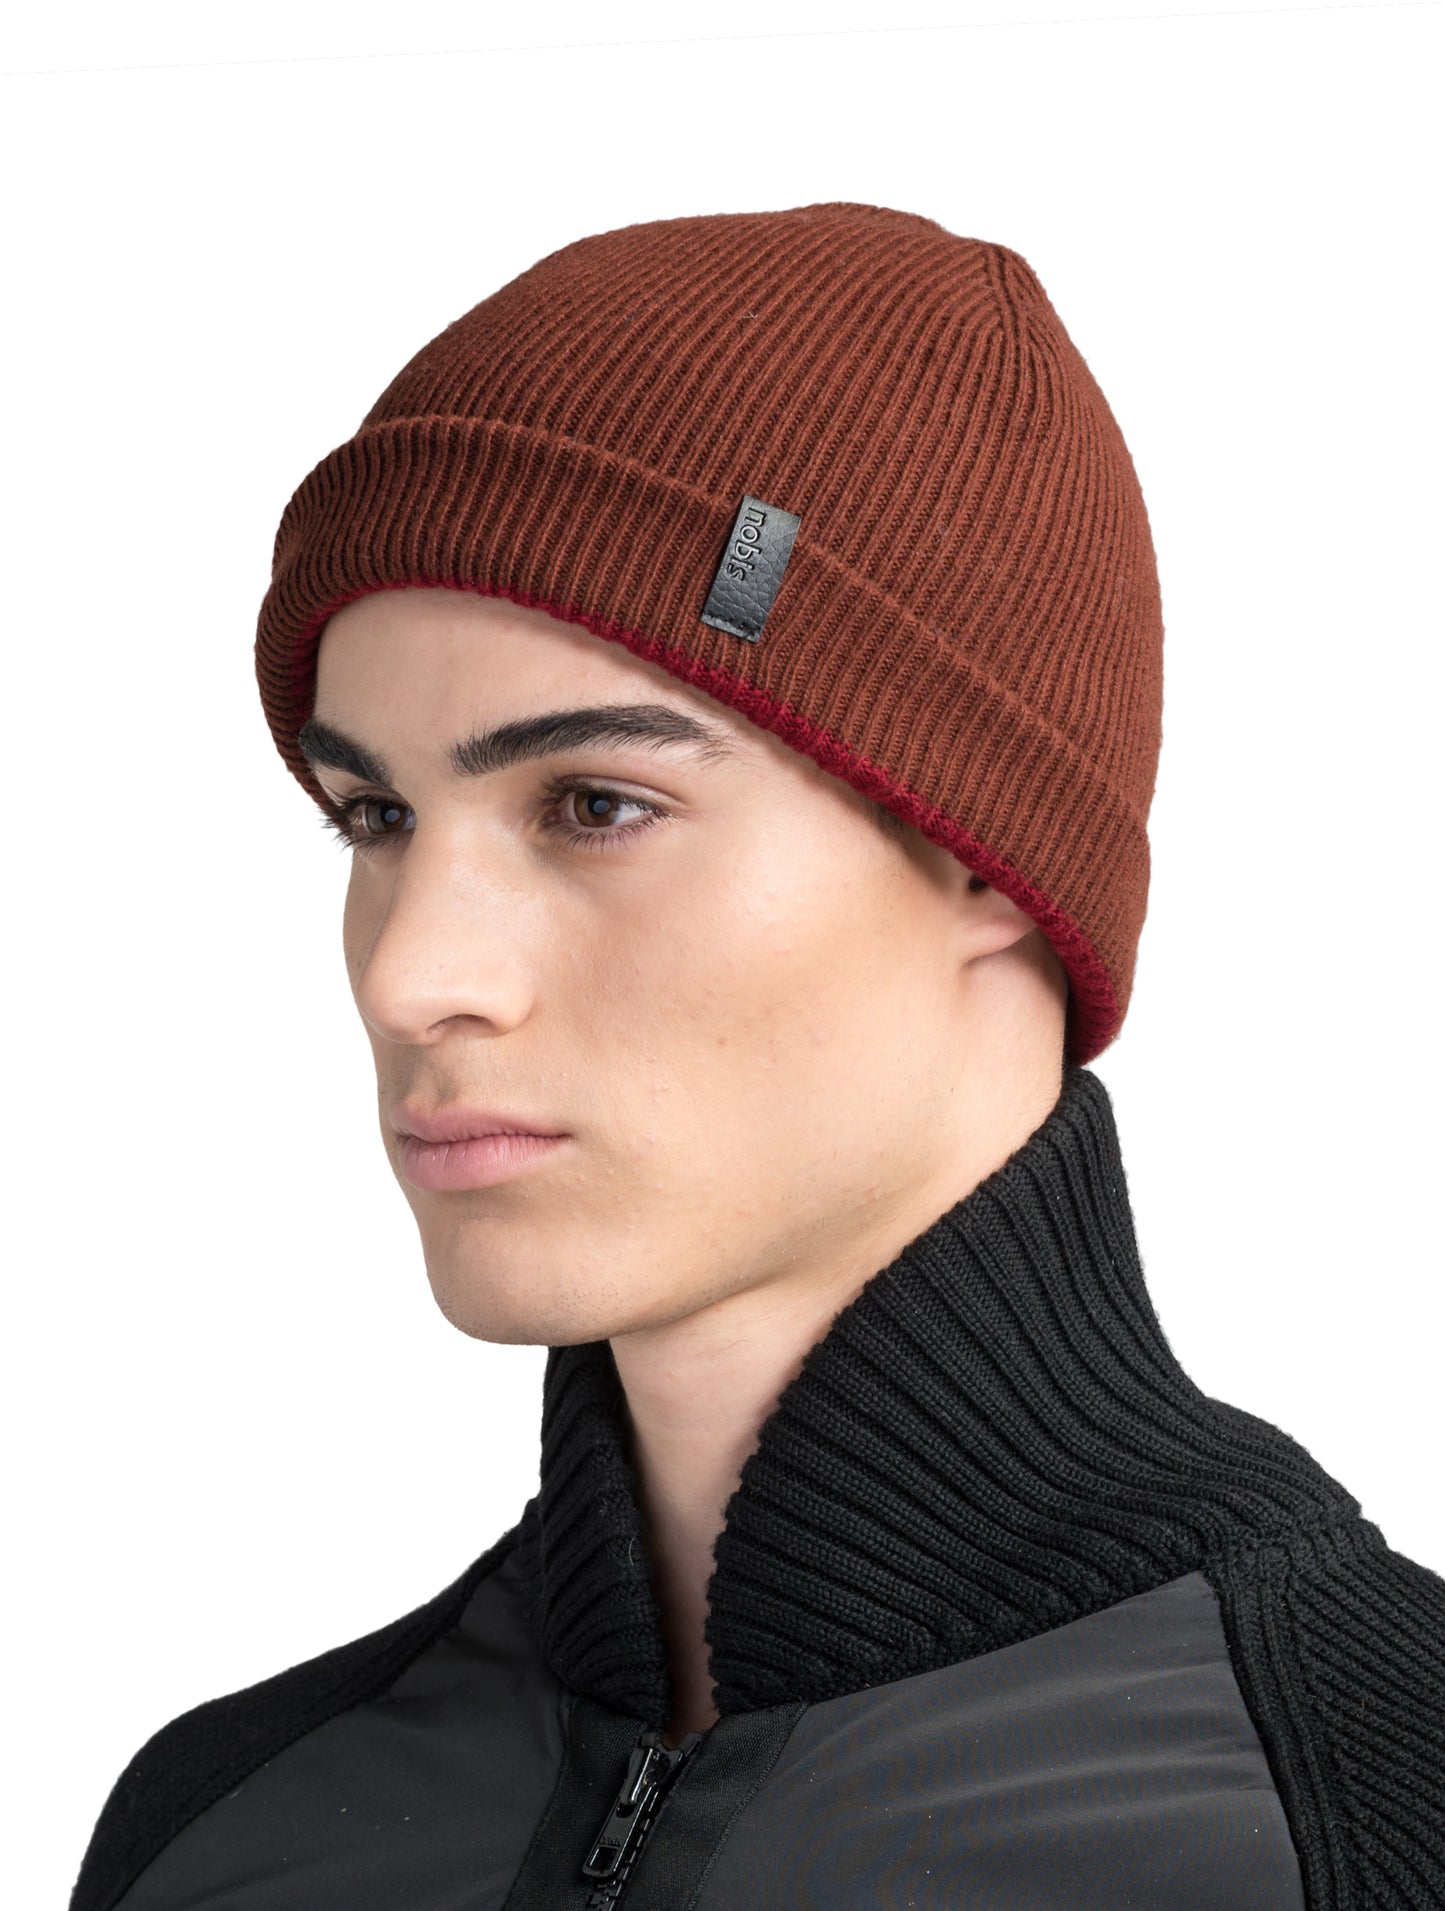 Ardn Unisex Tailored Reversible Knit Beanie in an extra fine merino wool blend, fitted rib knit, and reversible design, in Potent Purple/Rio Red